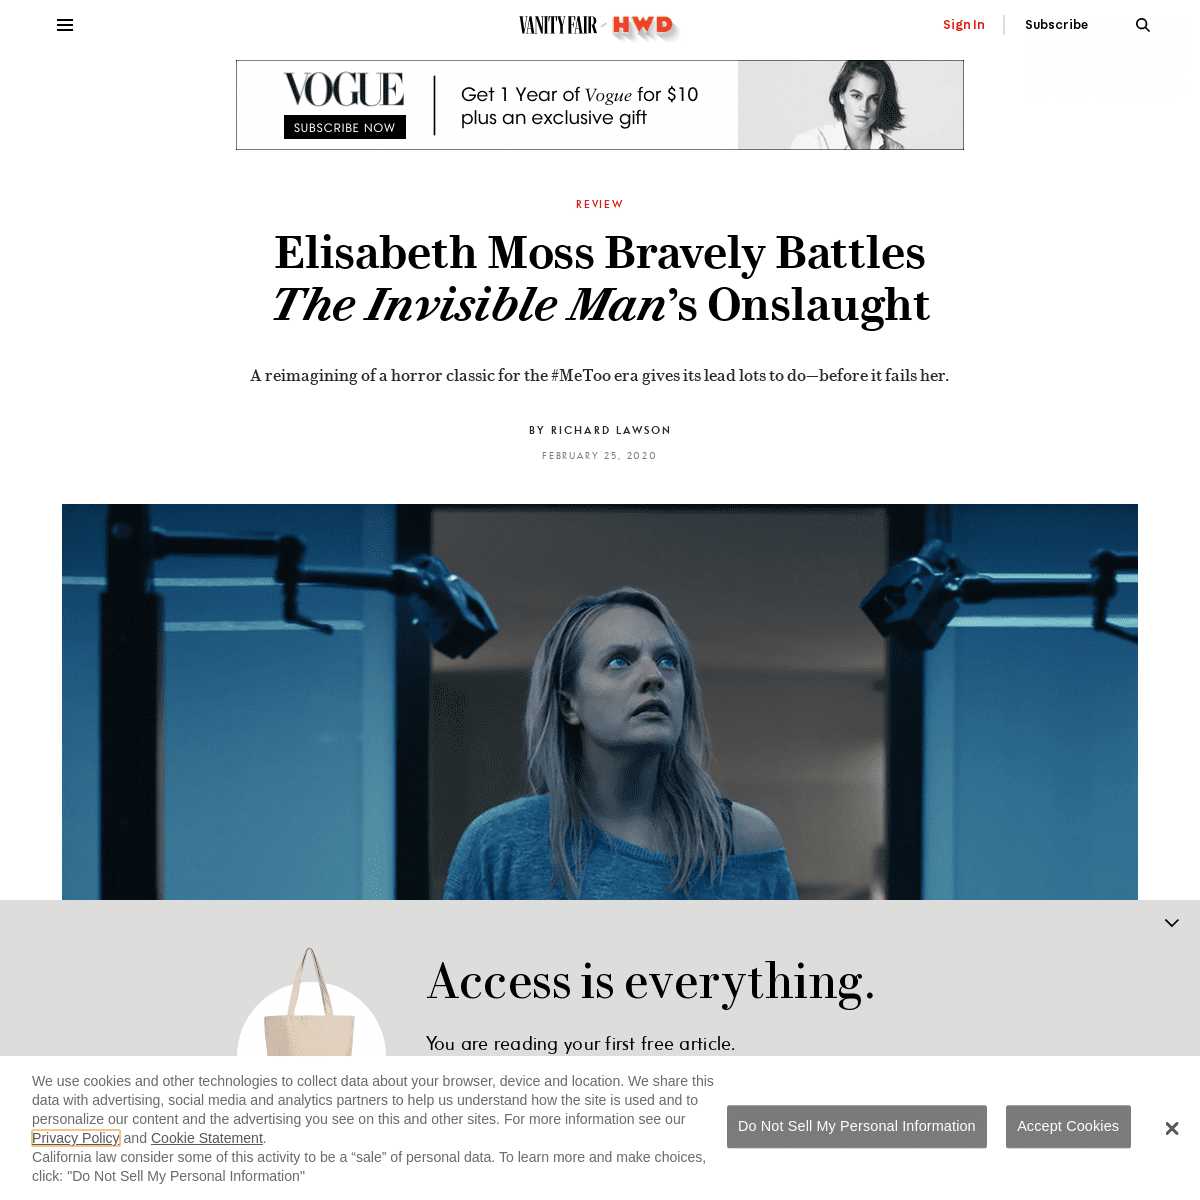 A complete backup of www.vanityfair.com/hollywood/2020/02/elisabeth-moss-invisible-man-review